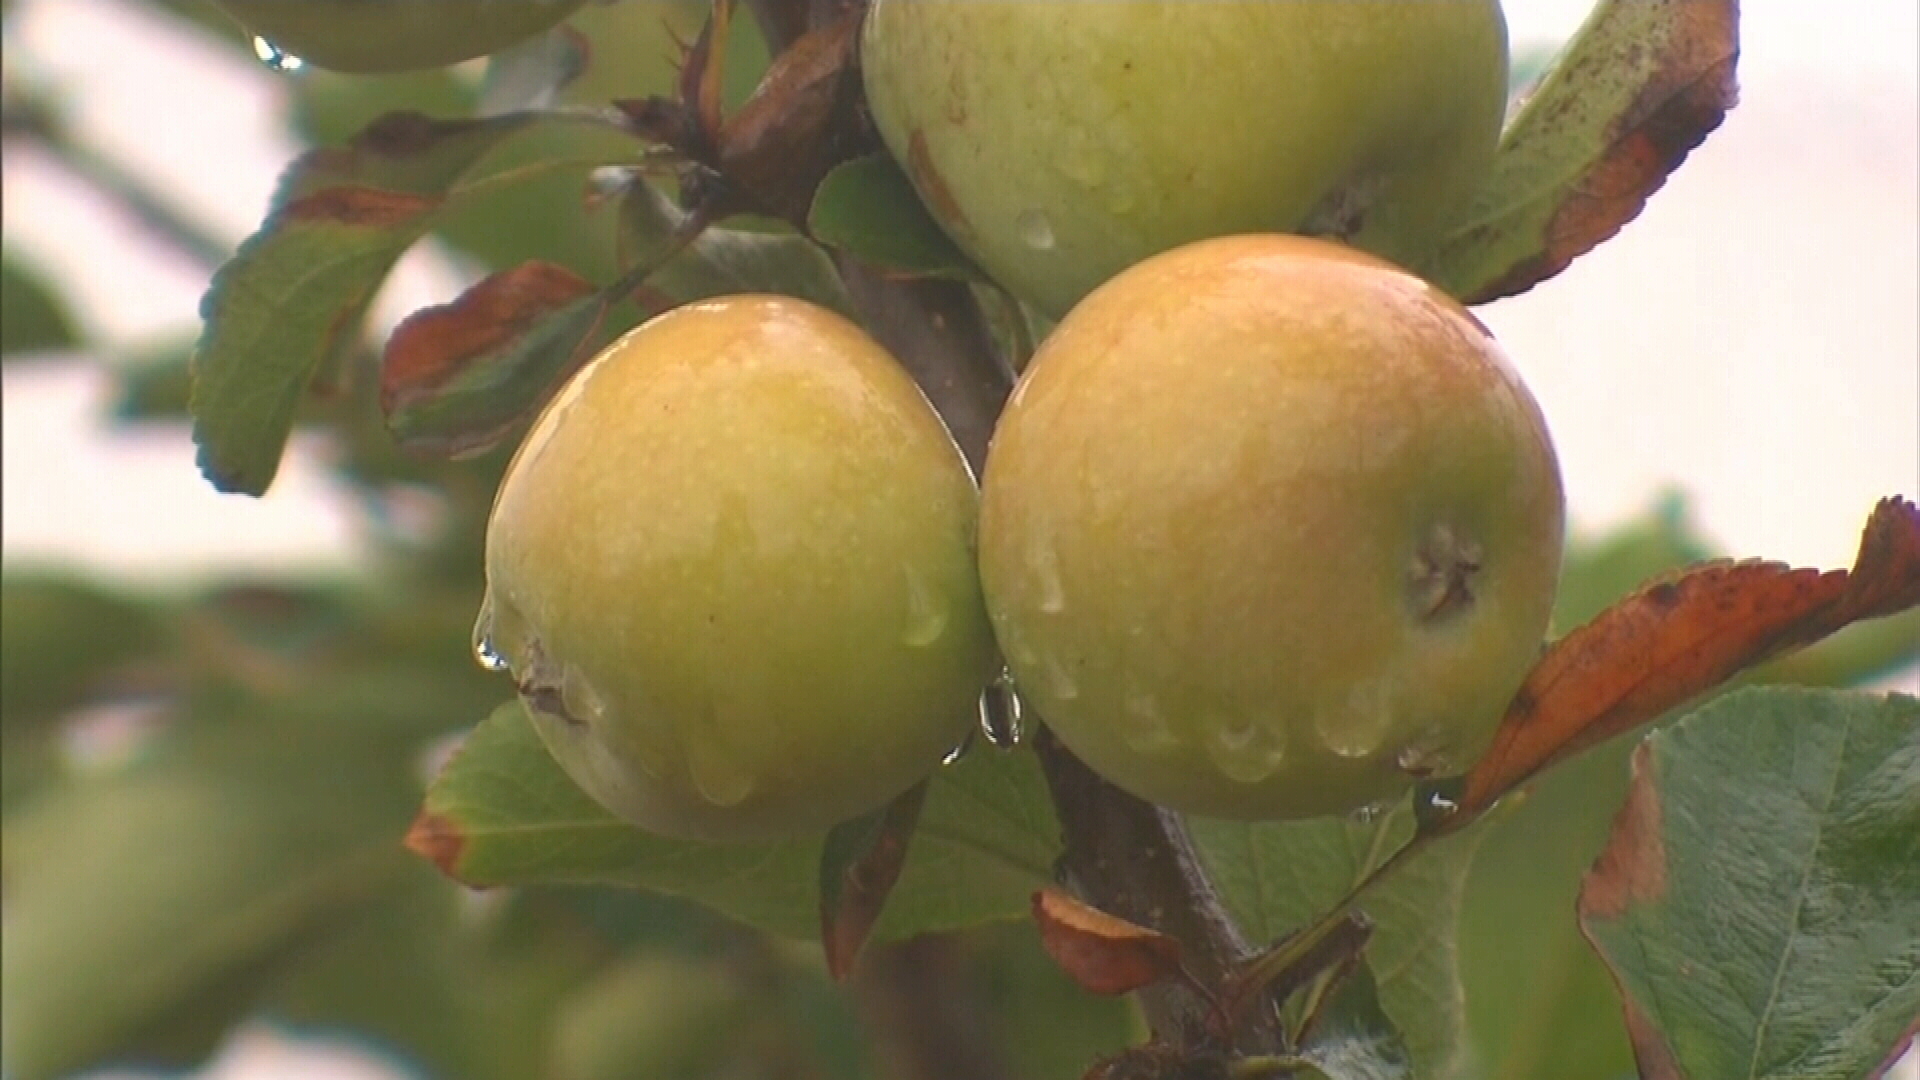 Many apple orchards in the area were destroyed in the fires, but some survived.